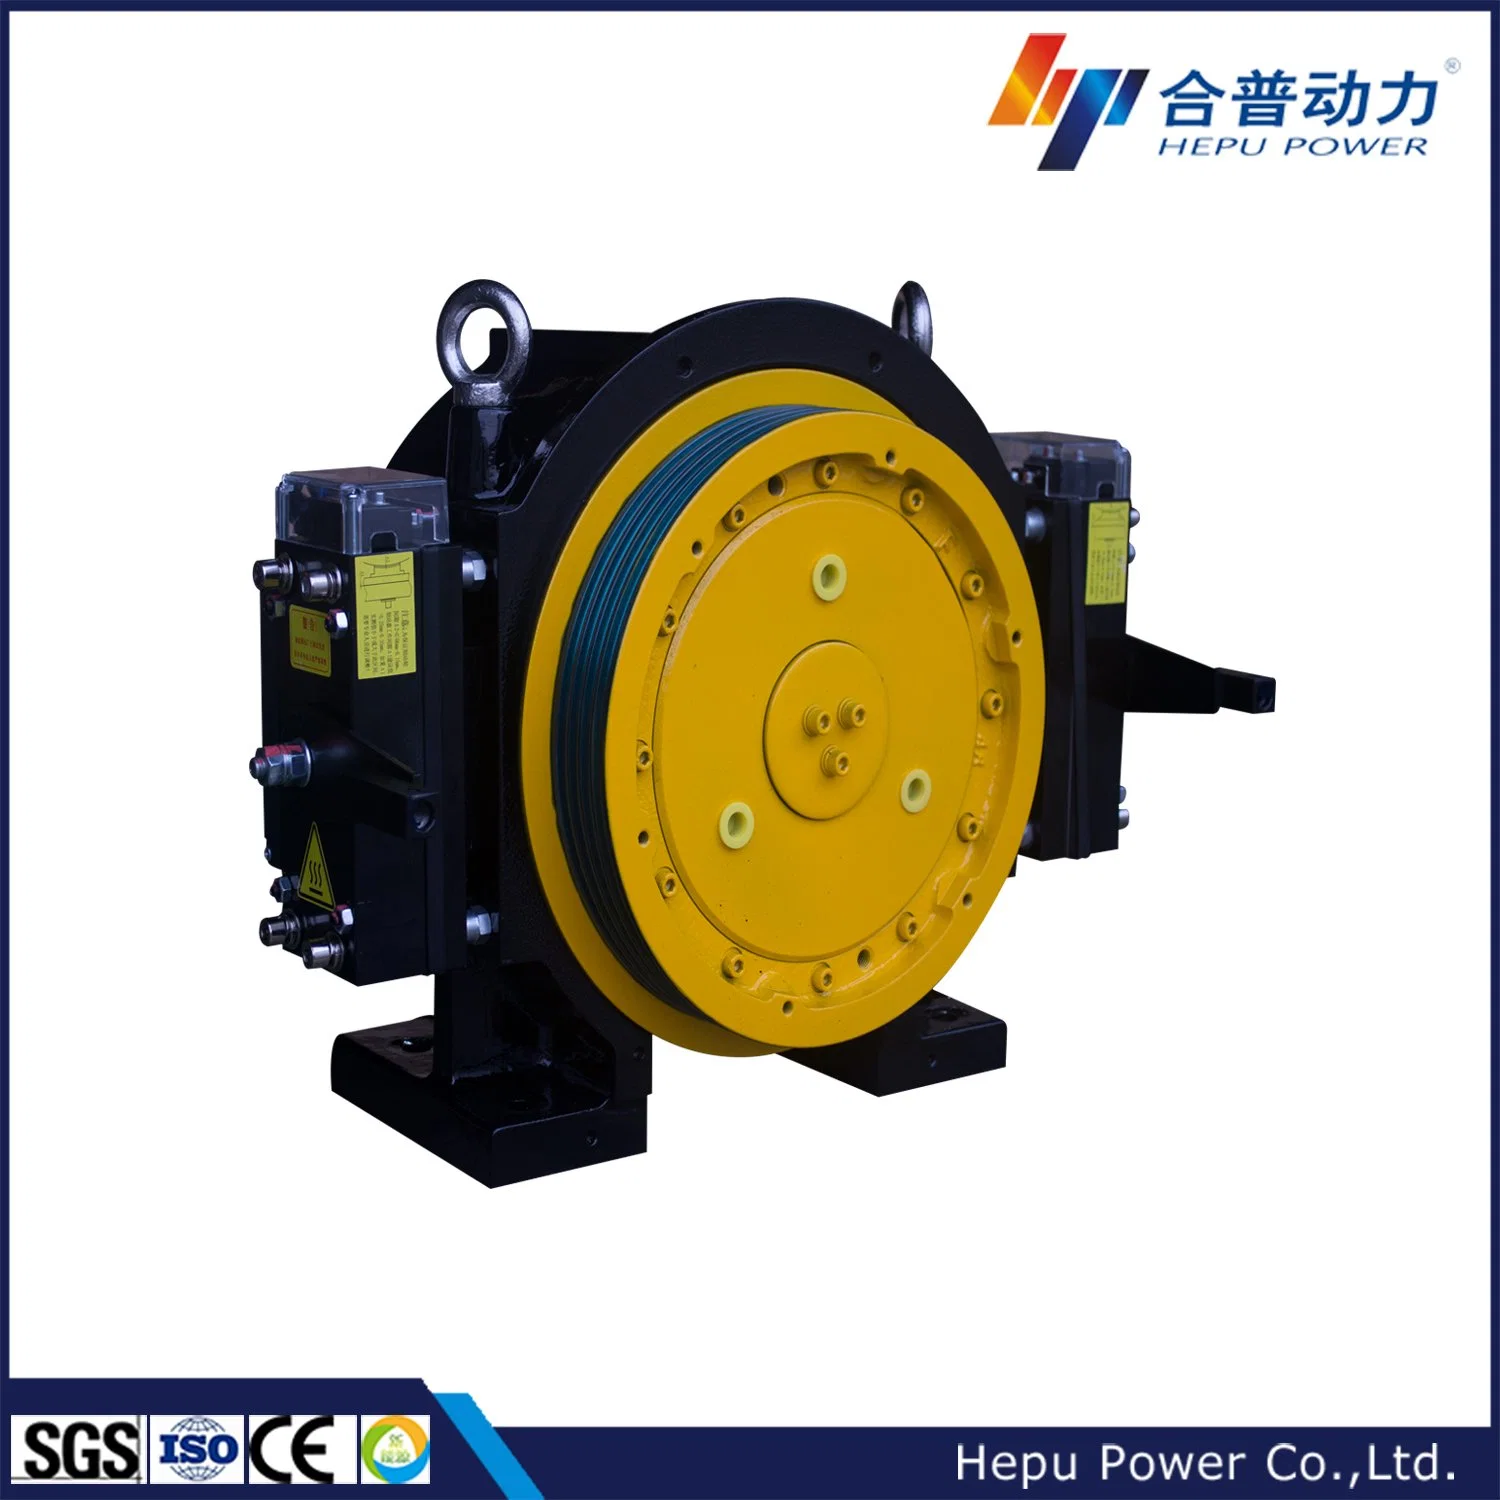 China Factory Elevator Spare Parts Geared Traction Machine, High Performance Geared Elevator Motor Block Brake Series